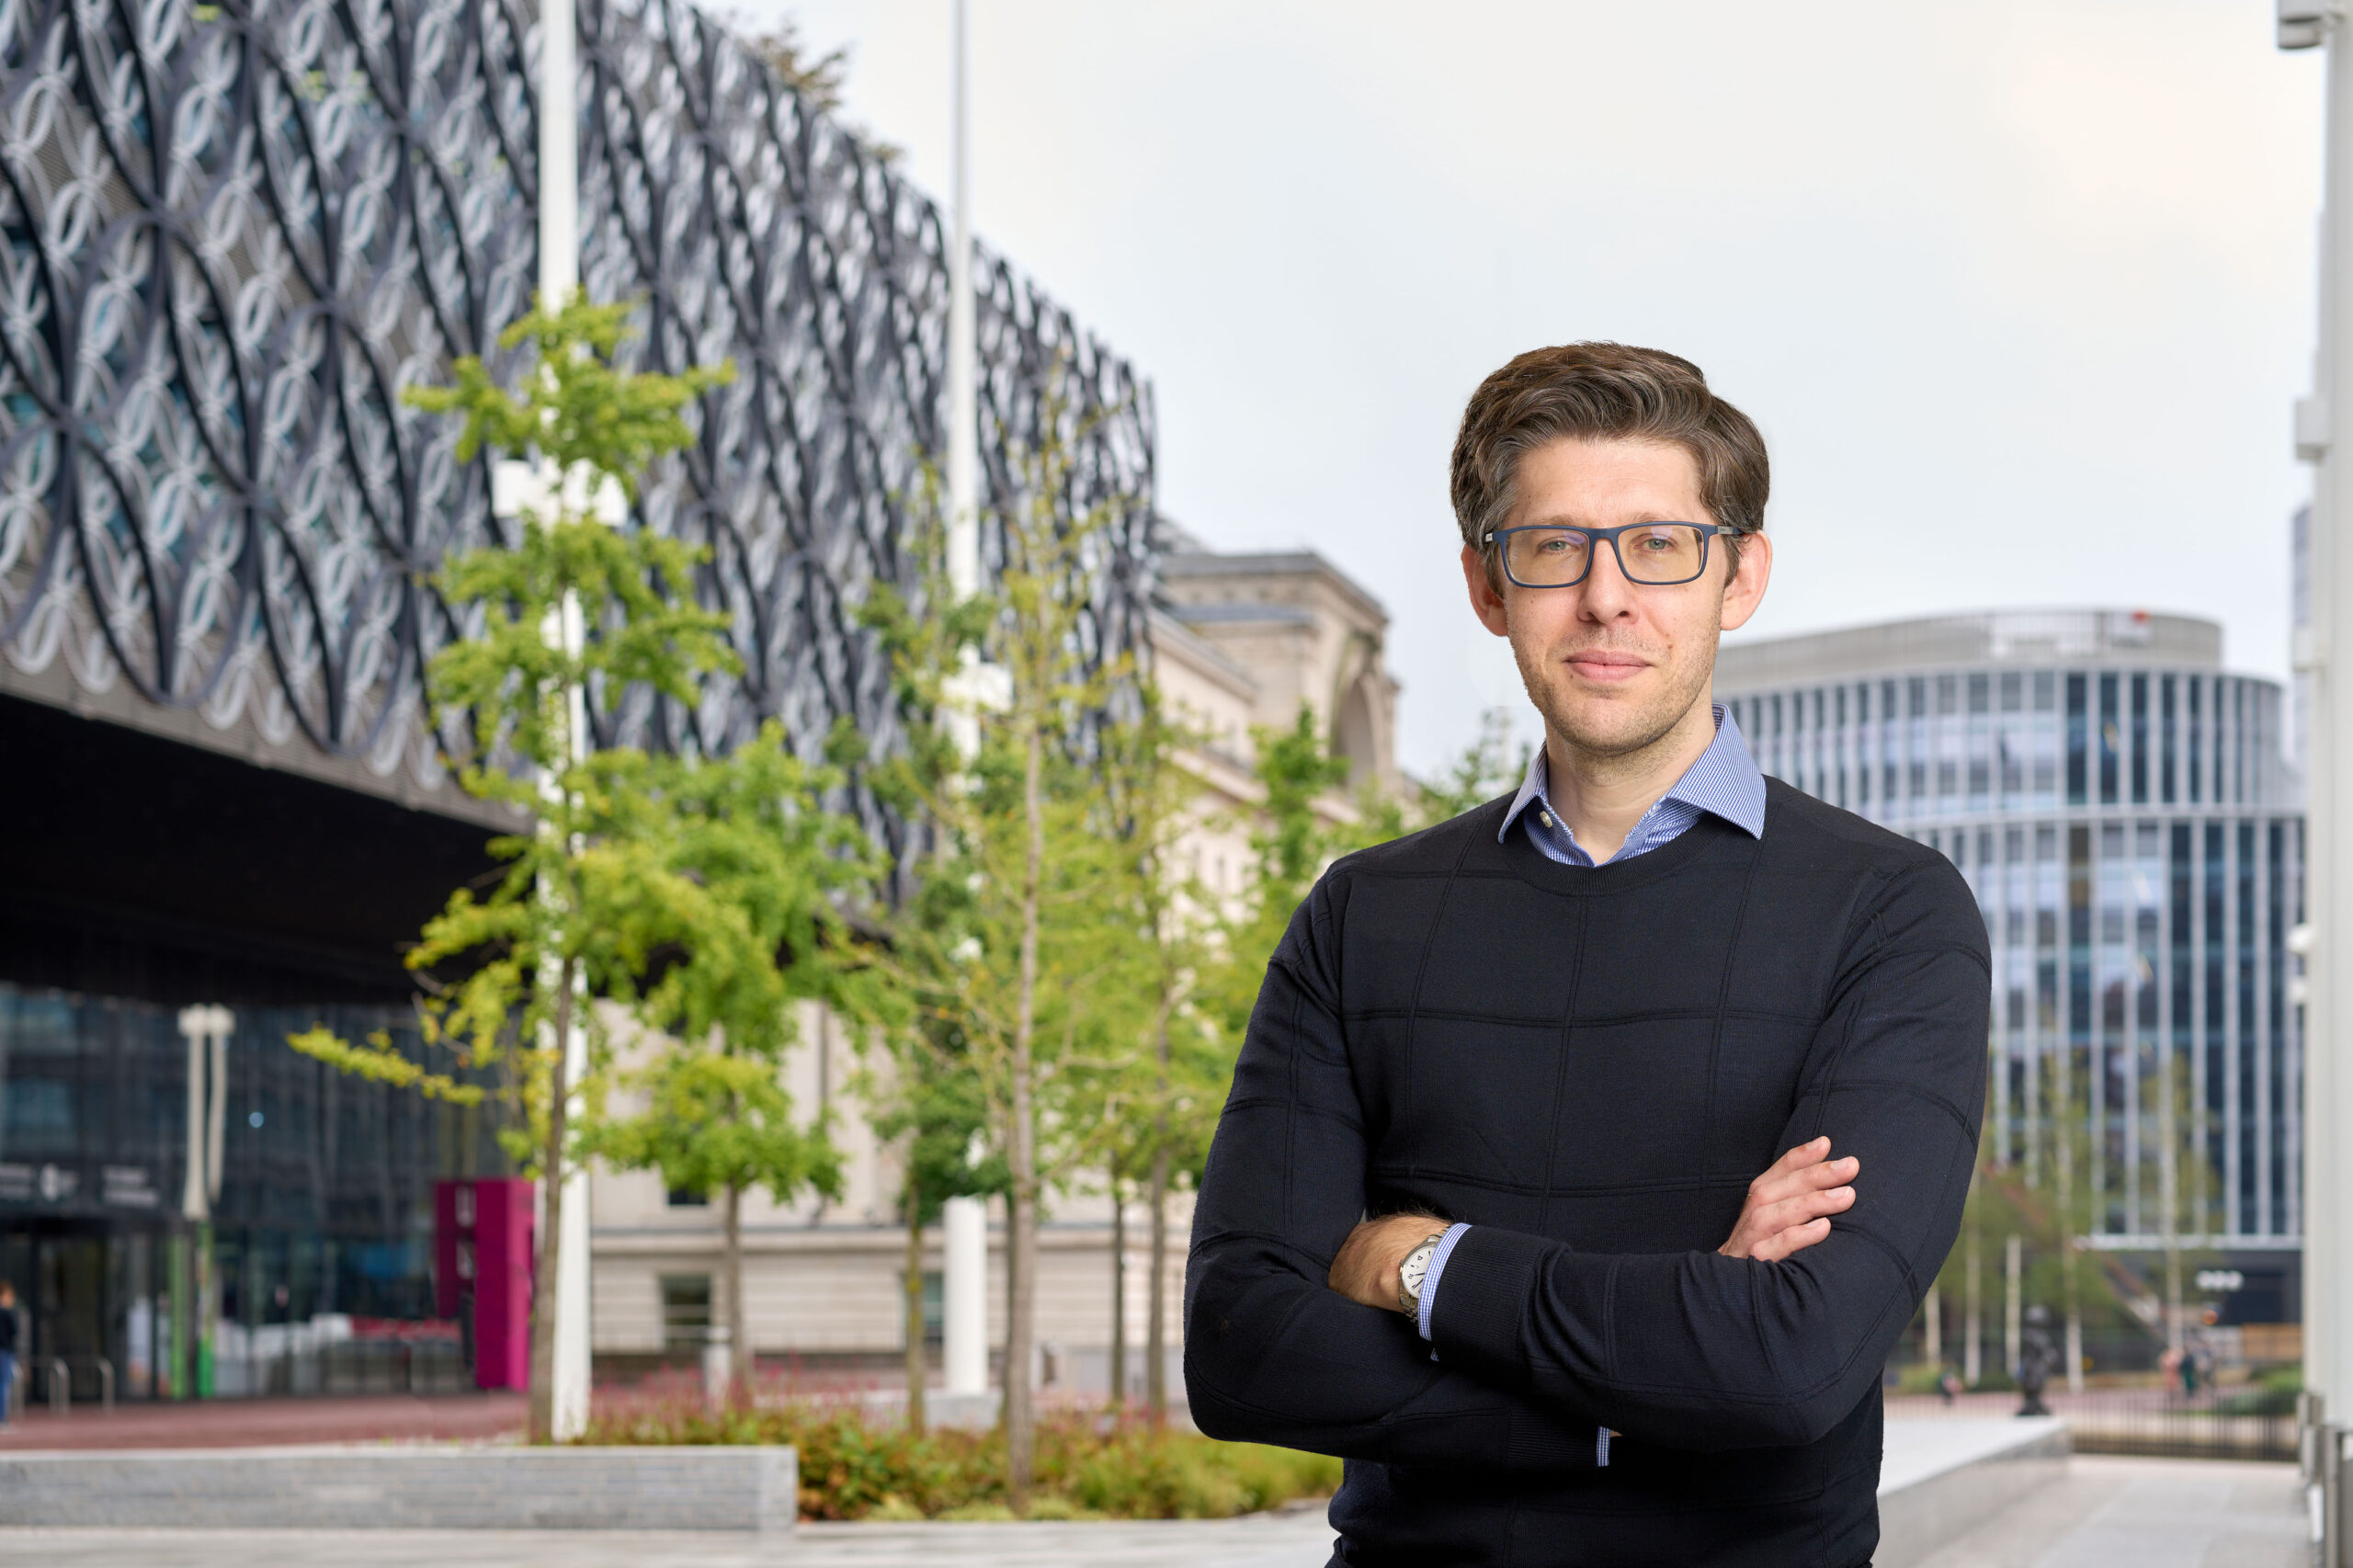 A man in a black jumper with a light blue shirt collar is standing with his arms folded in front of some trees and buildings in central Birmingham.